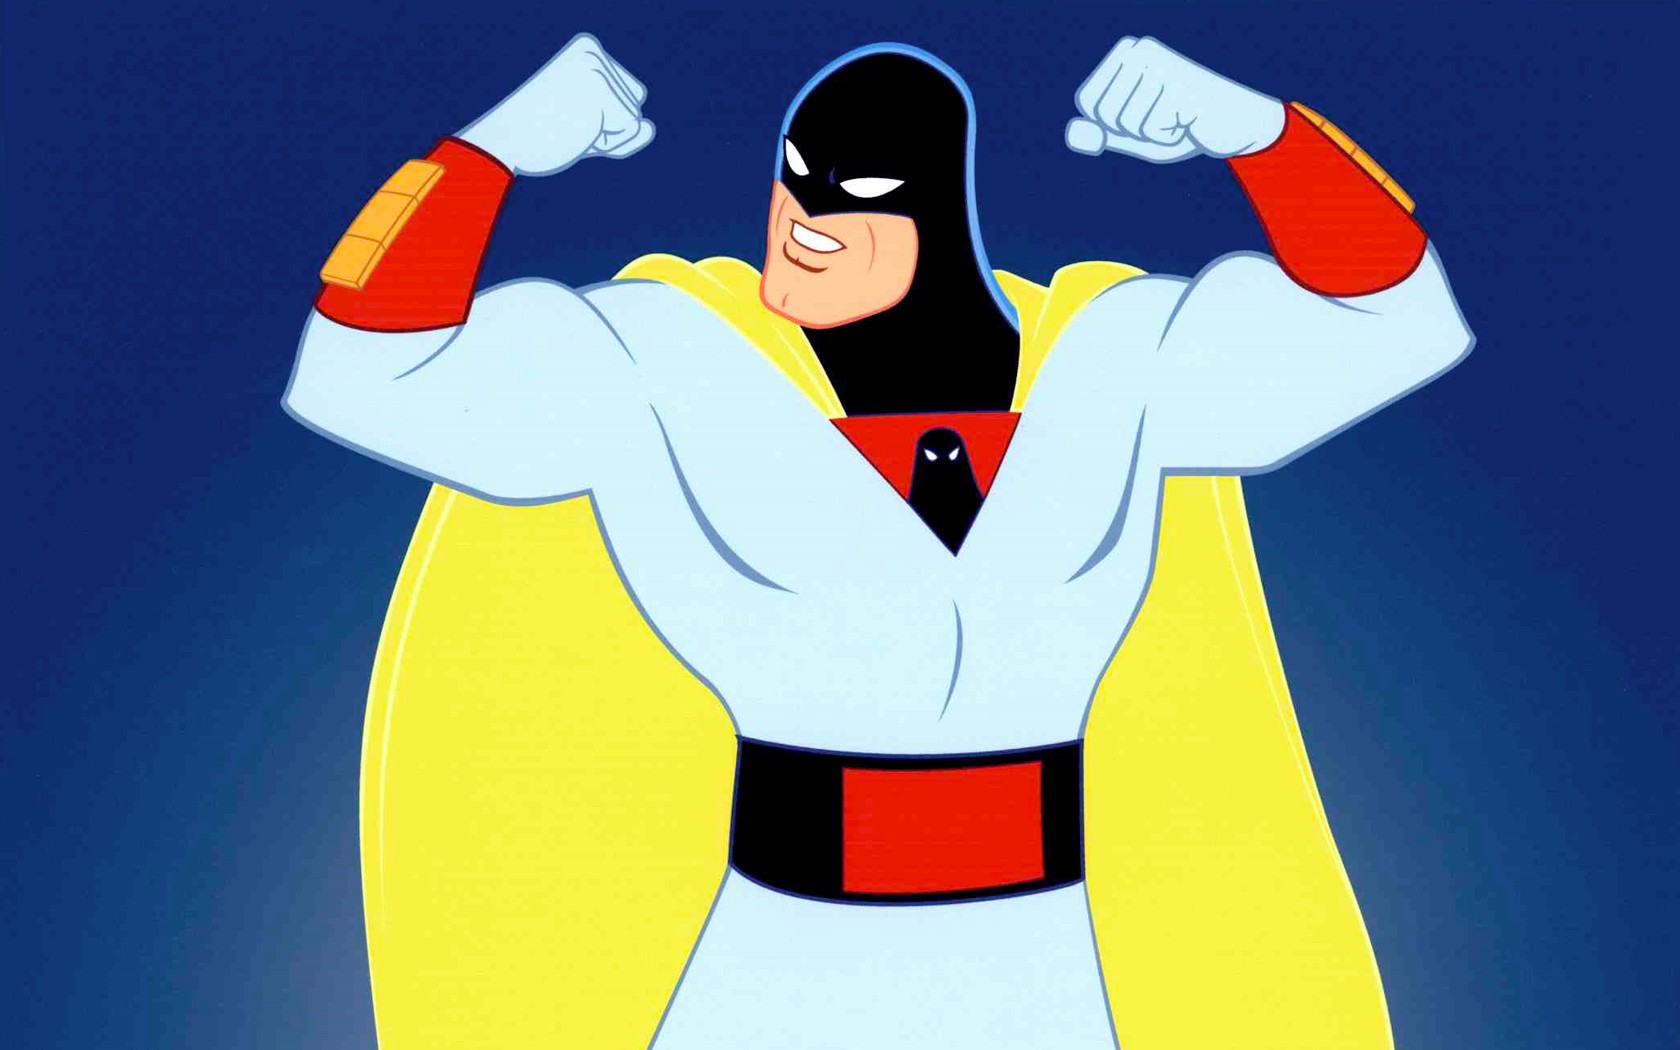 Spaceghost Backgrounds, Compatible - PC, Mobile, Gadgets| 1680x1050 px